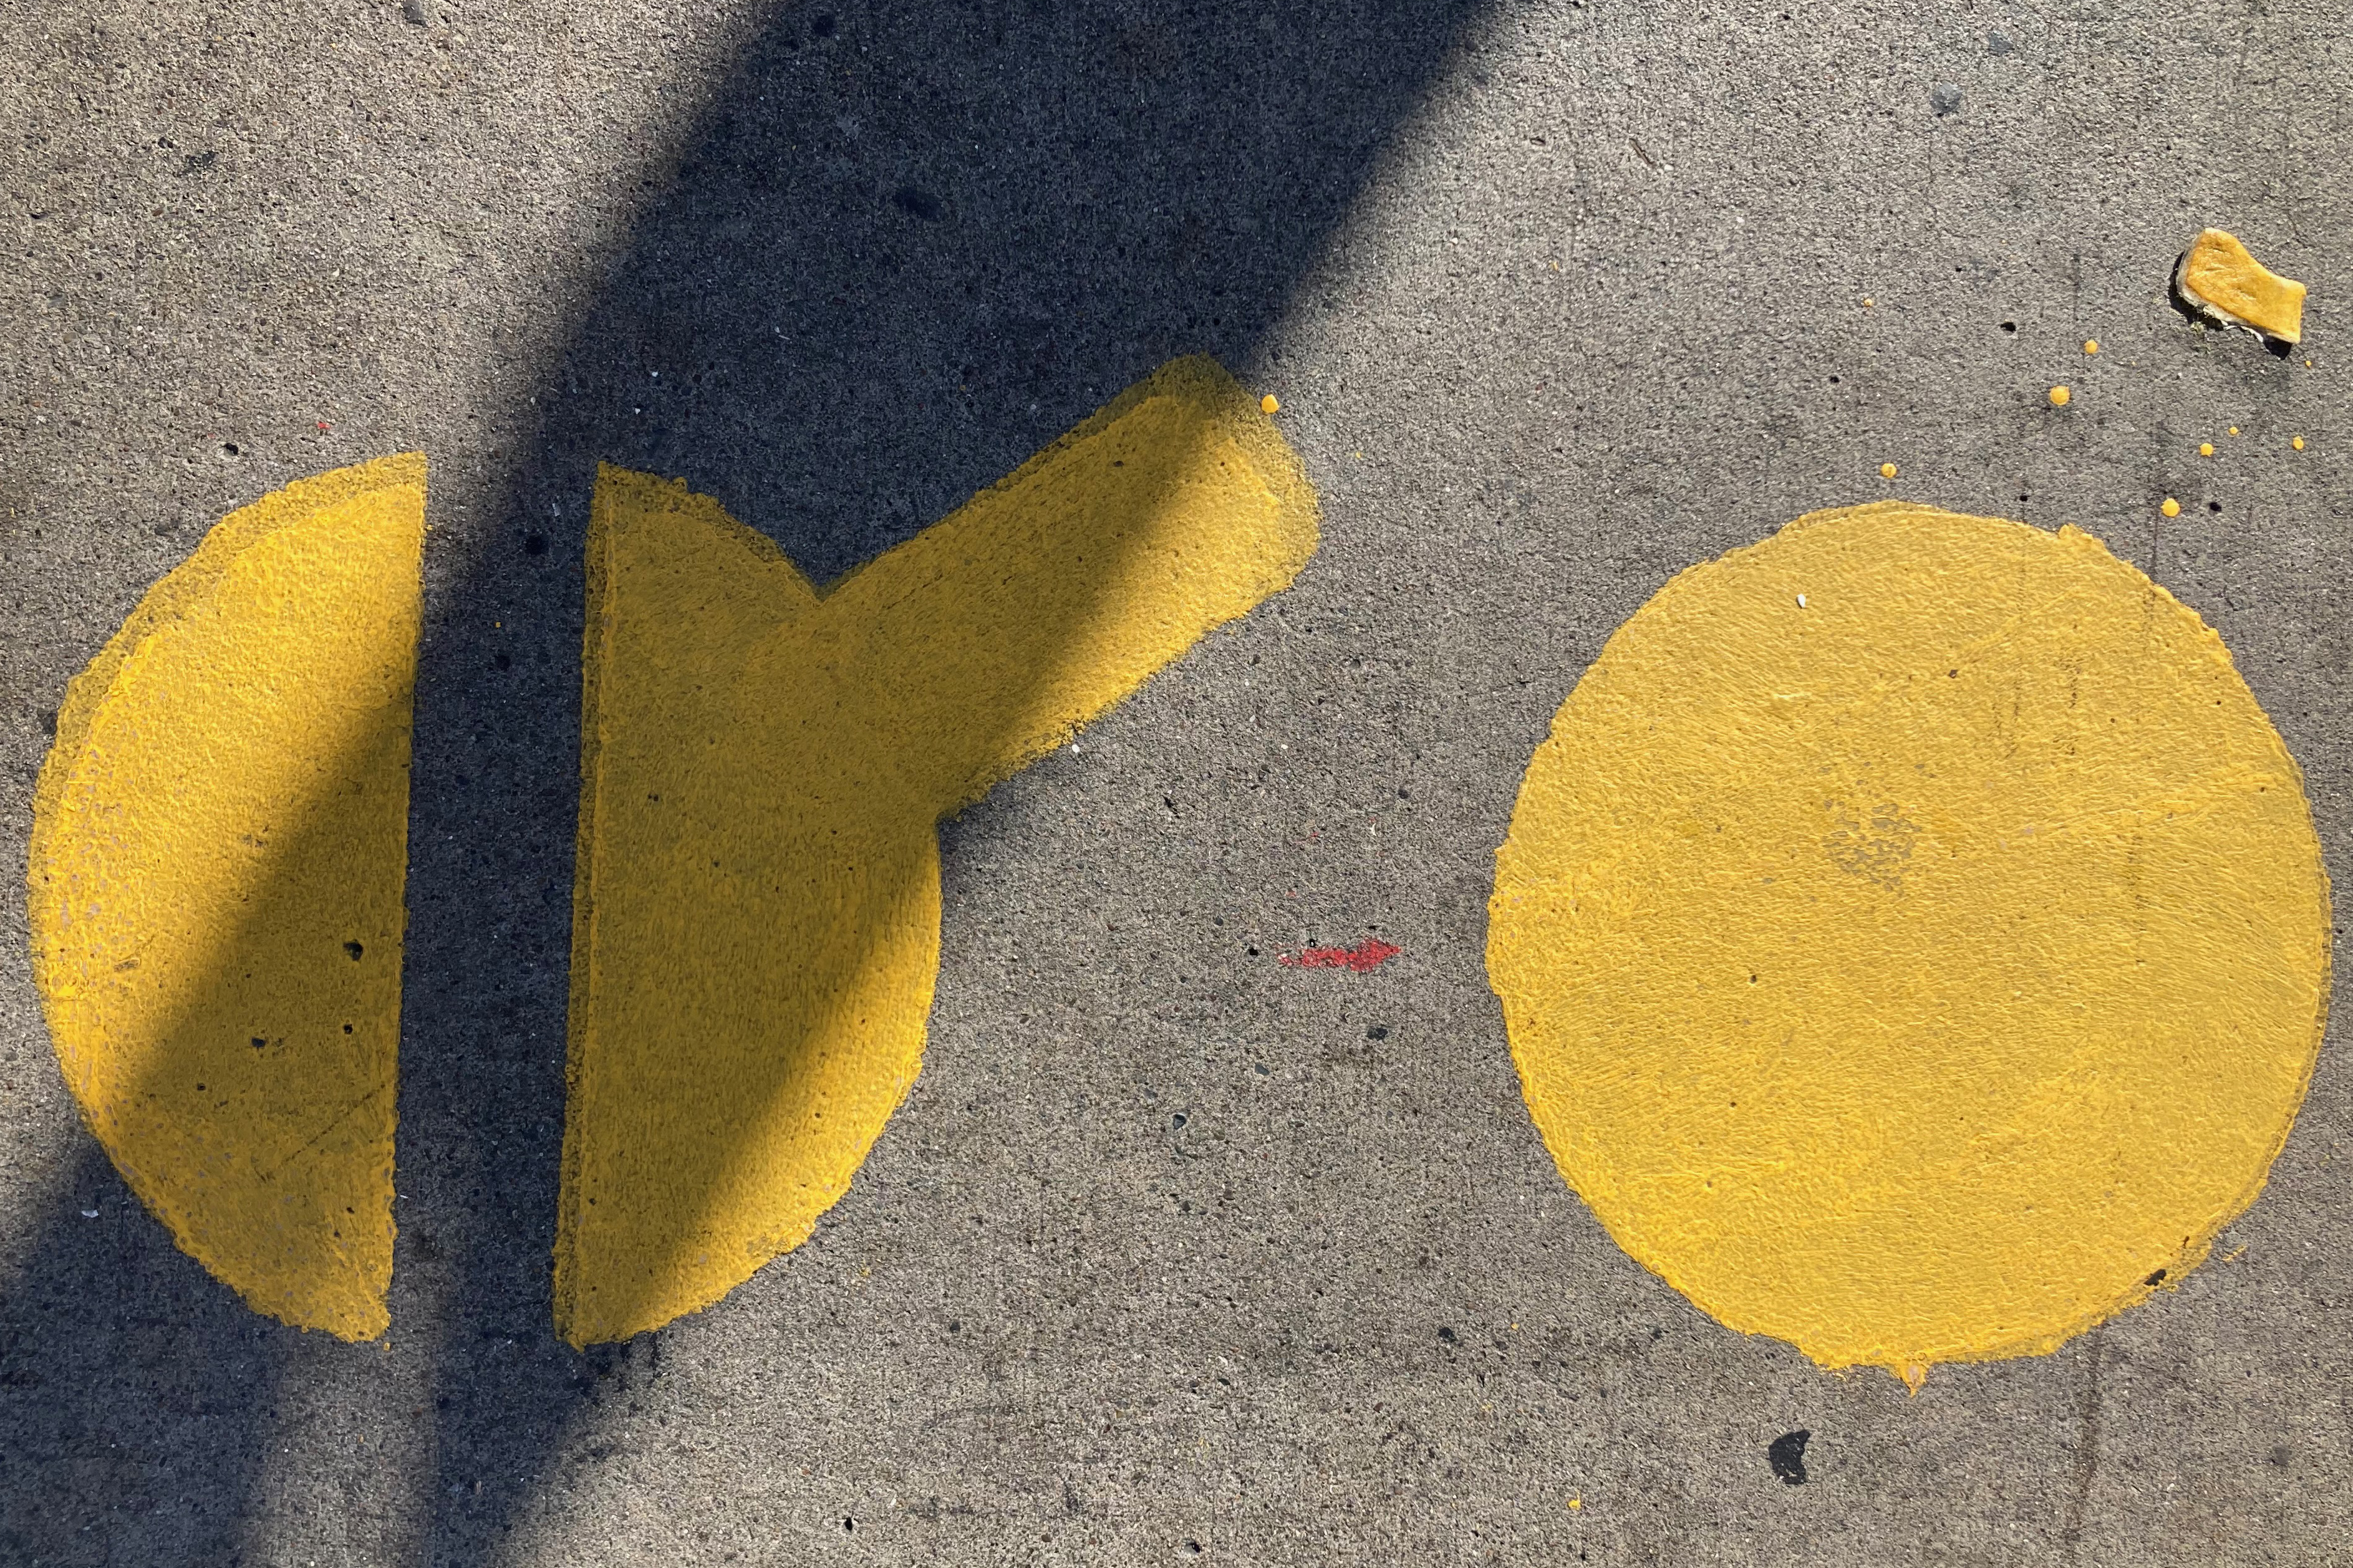 Yellow shapes on pavement with a shadow intersecting one, and a small orange peel nearby.